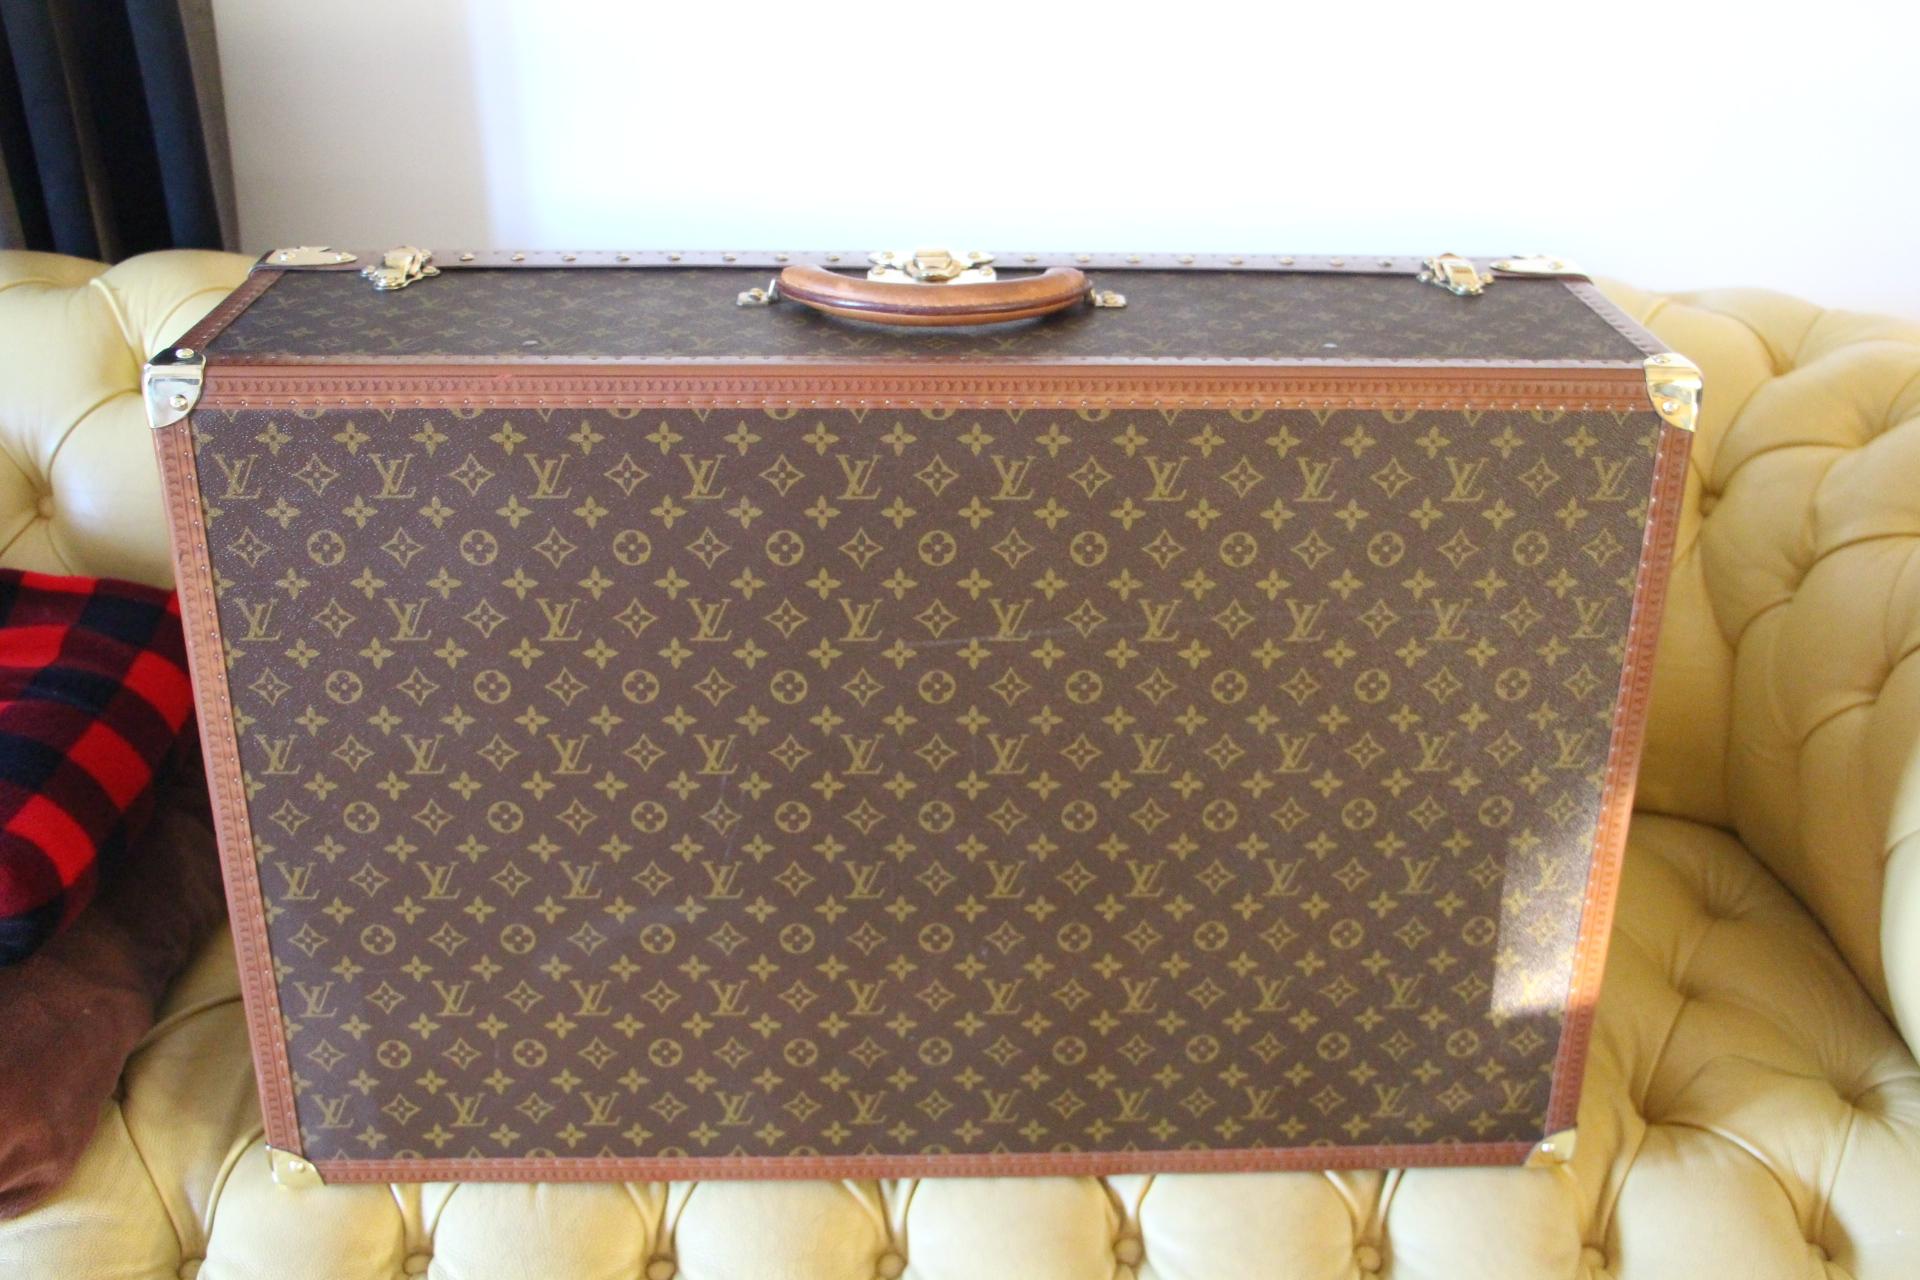 Magnificent Louis Vuitton Alzer monogramm suitcase. This 80 cm suitcase is the largest one made by Louis Vuitton.
All Louis Vuitton stamped solid brass fittings: lock, clasps and studs.
Very nice interior, fresh and clean,no smell,all original with